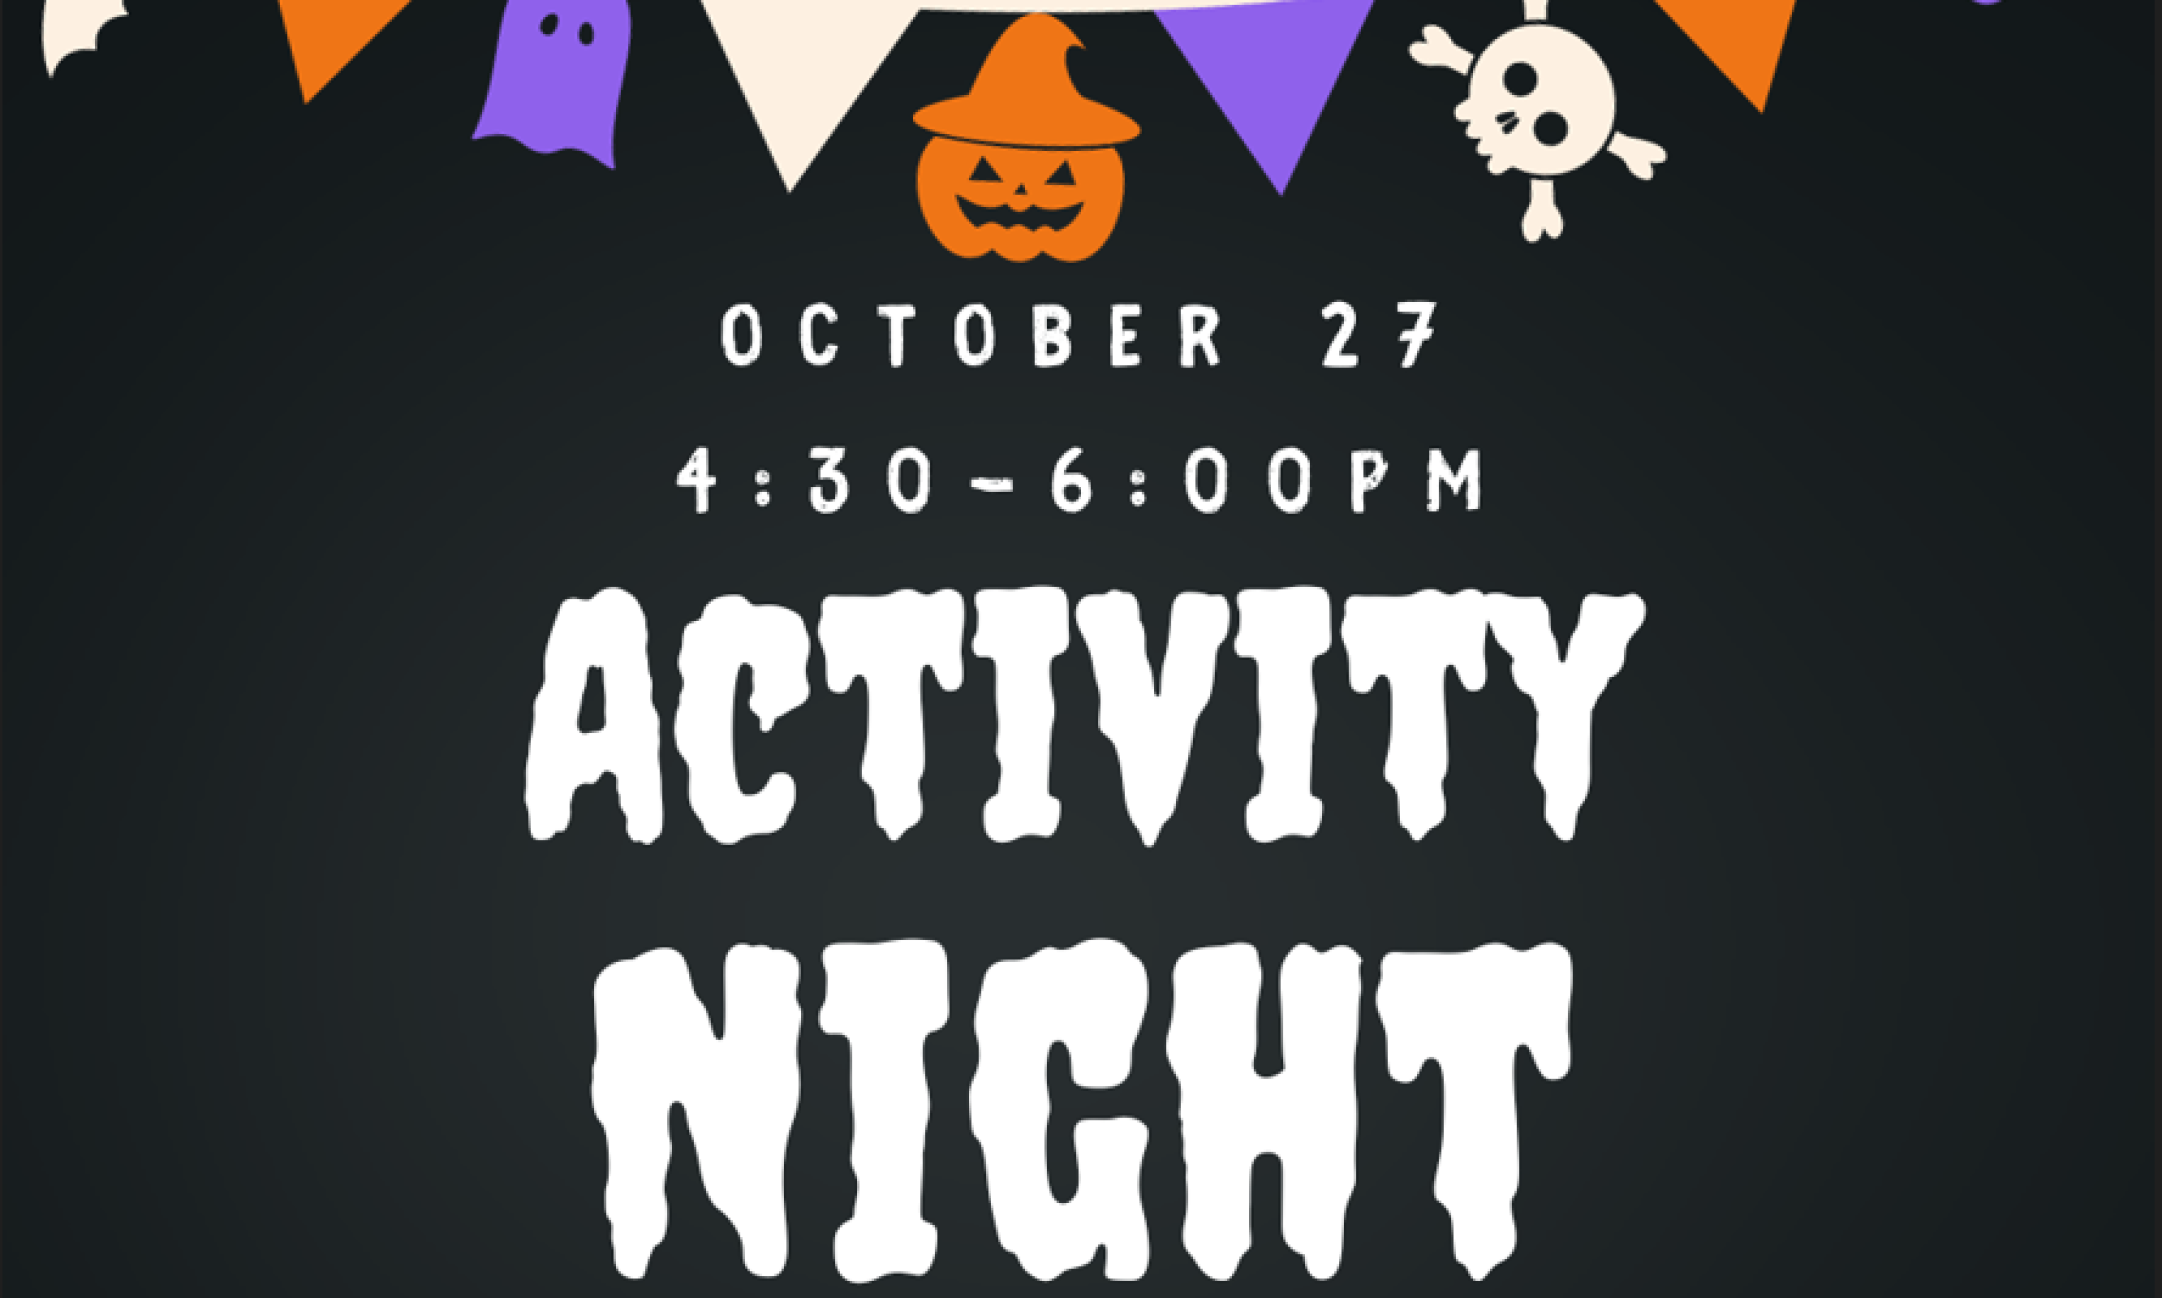 Activity Night Invite Oct 27th from 4:30-6pm